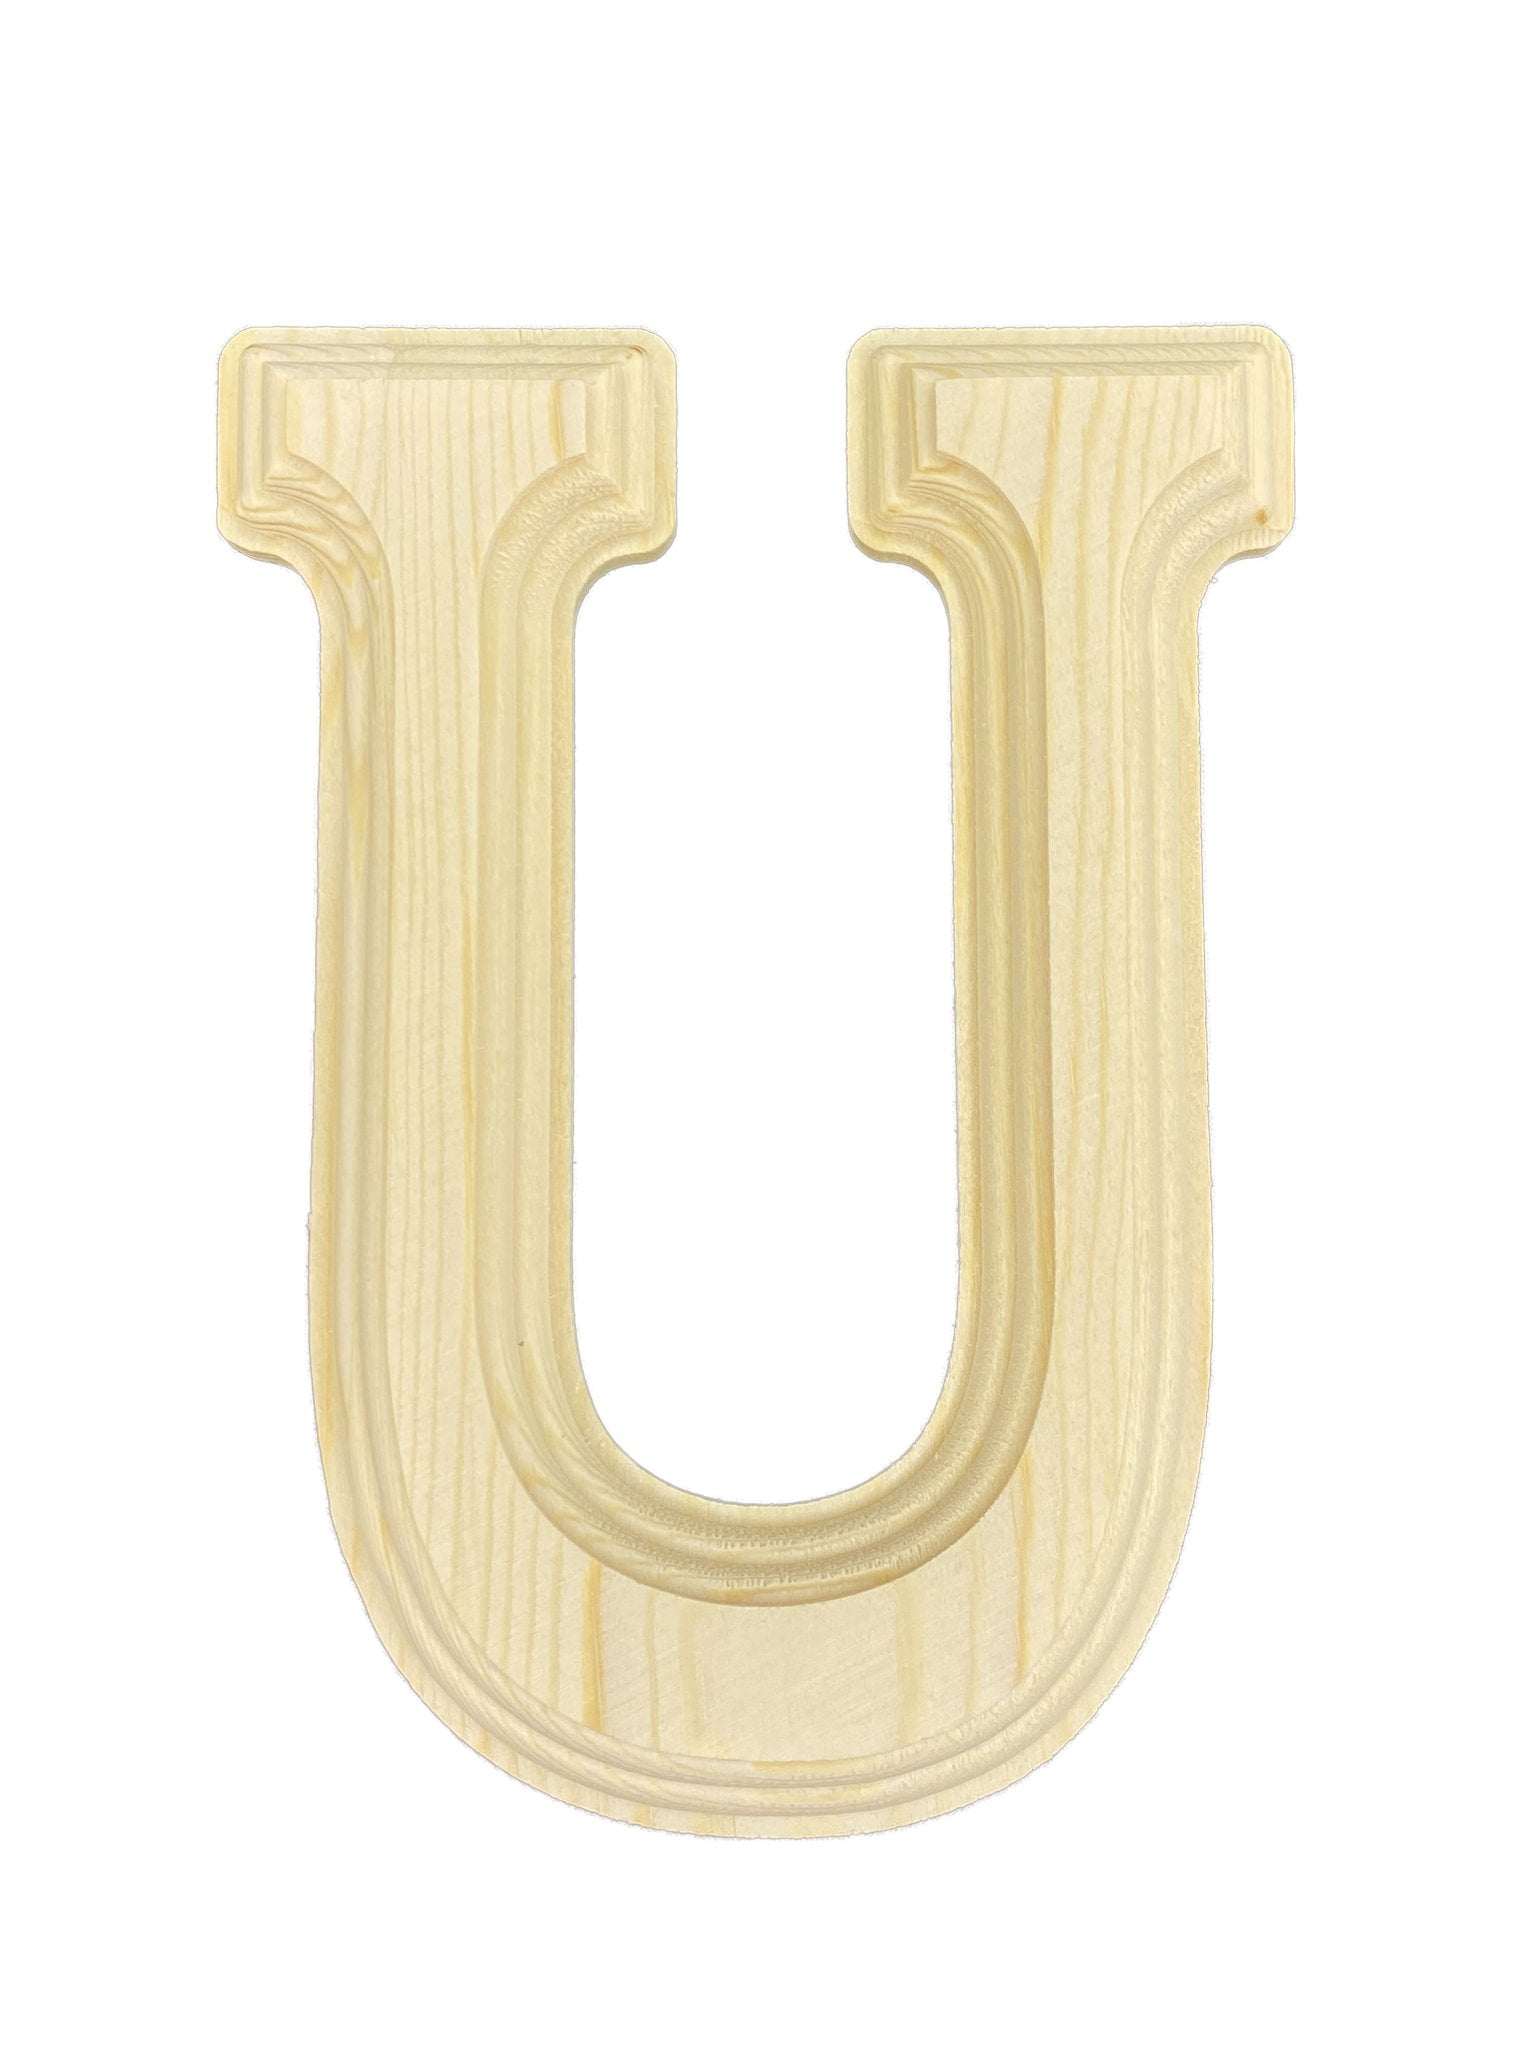 Crafts Central Pine Wood Beveled Wooden Numbers for Arts & Crafts, Decorations and DIY (Number 1)